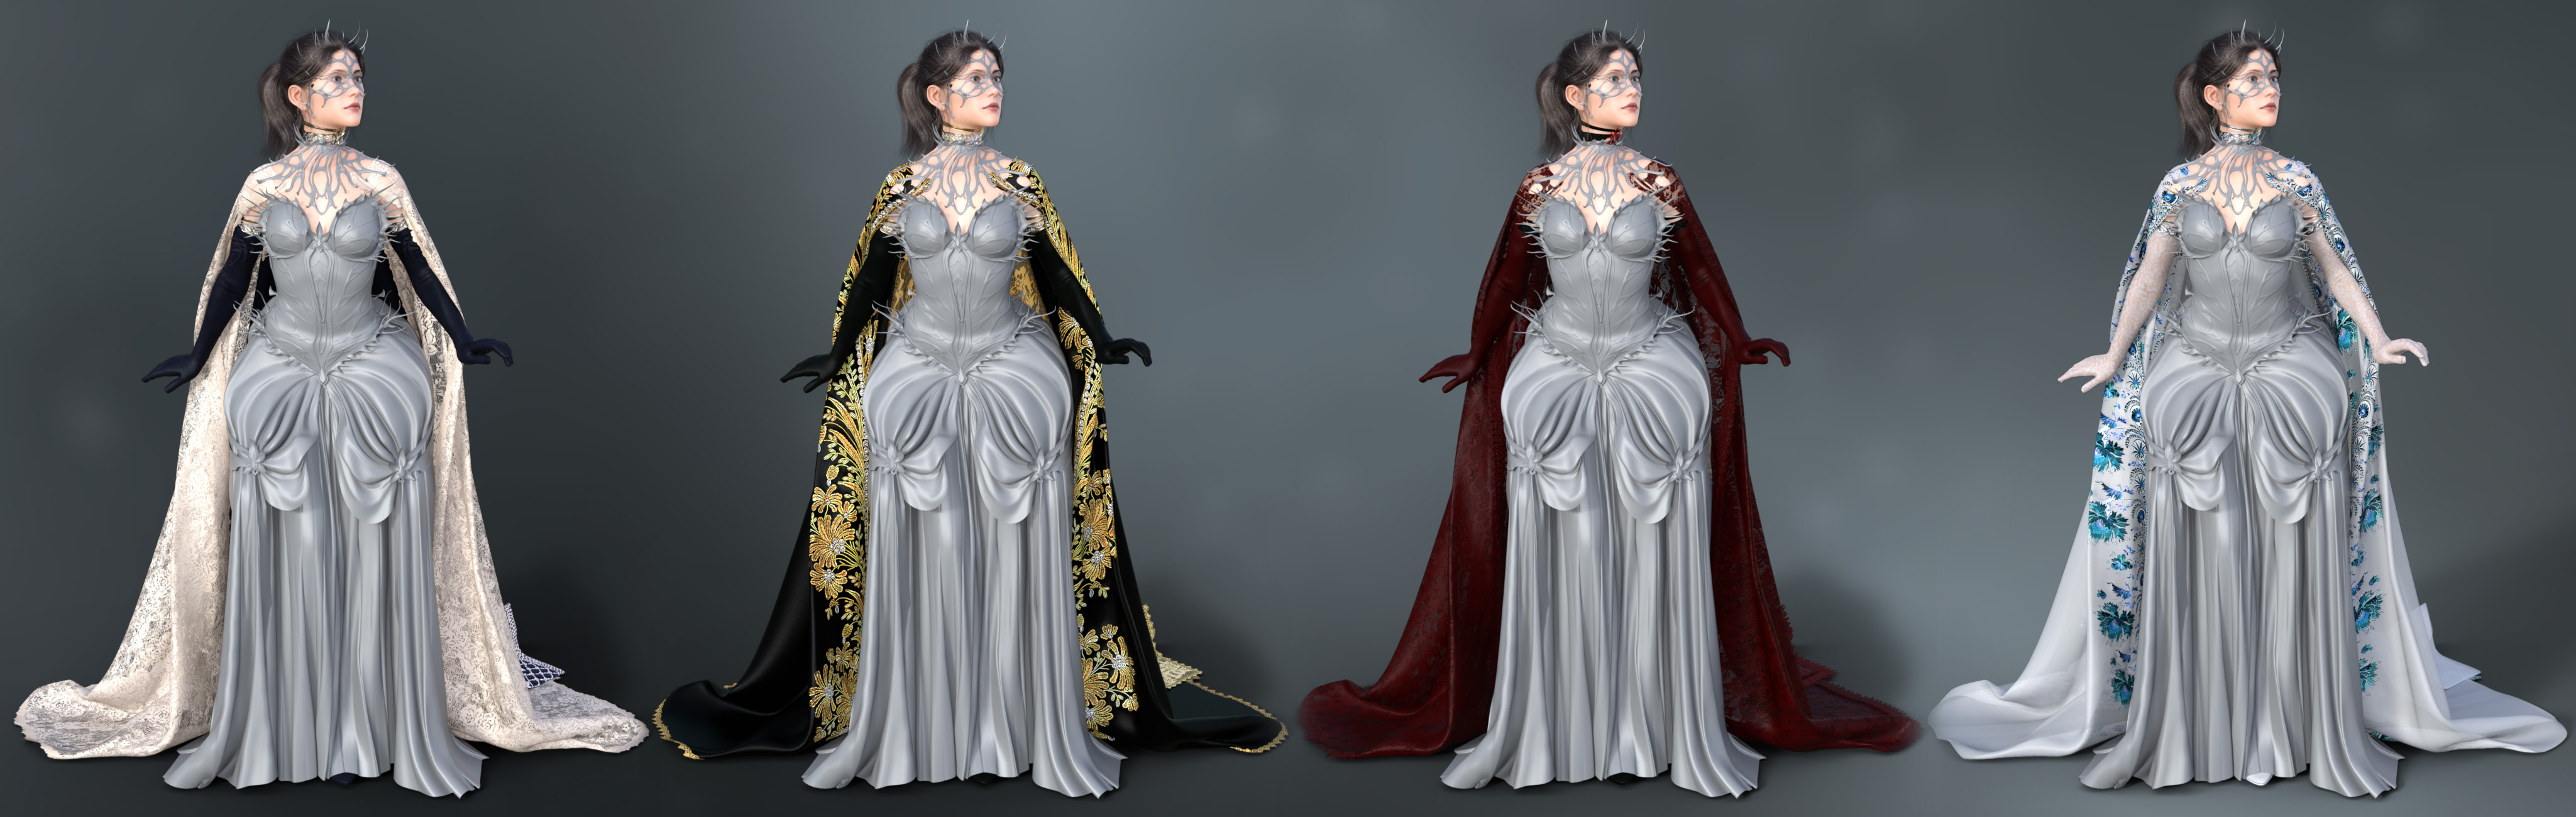 dForce Queen of Thorns Outfit Addon for Genesis 8 Female by: ArkiShox-Design, 3D Models by Daz 3D